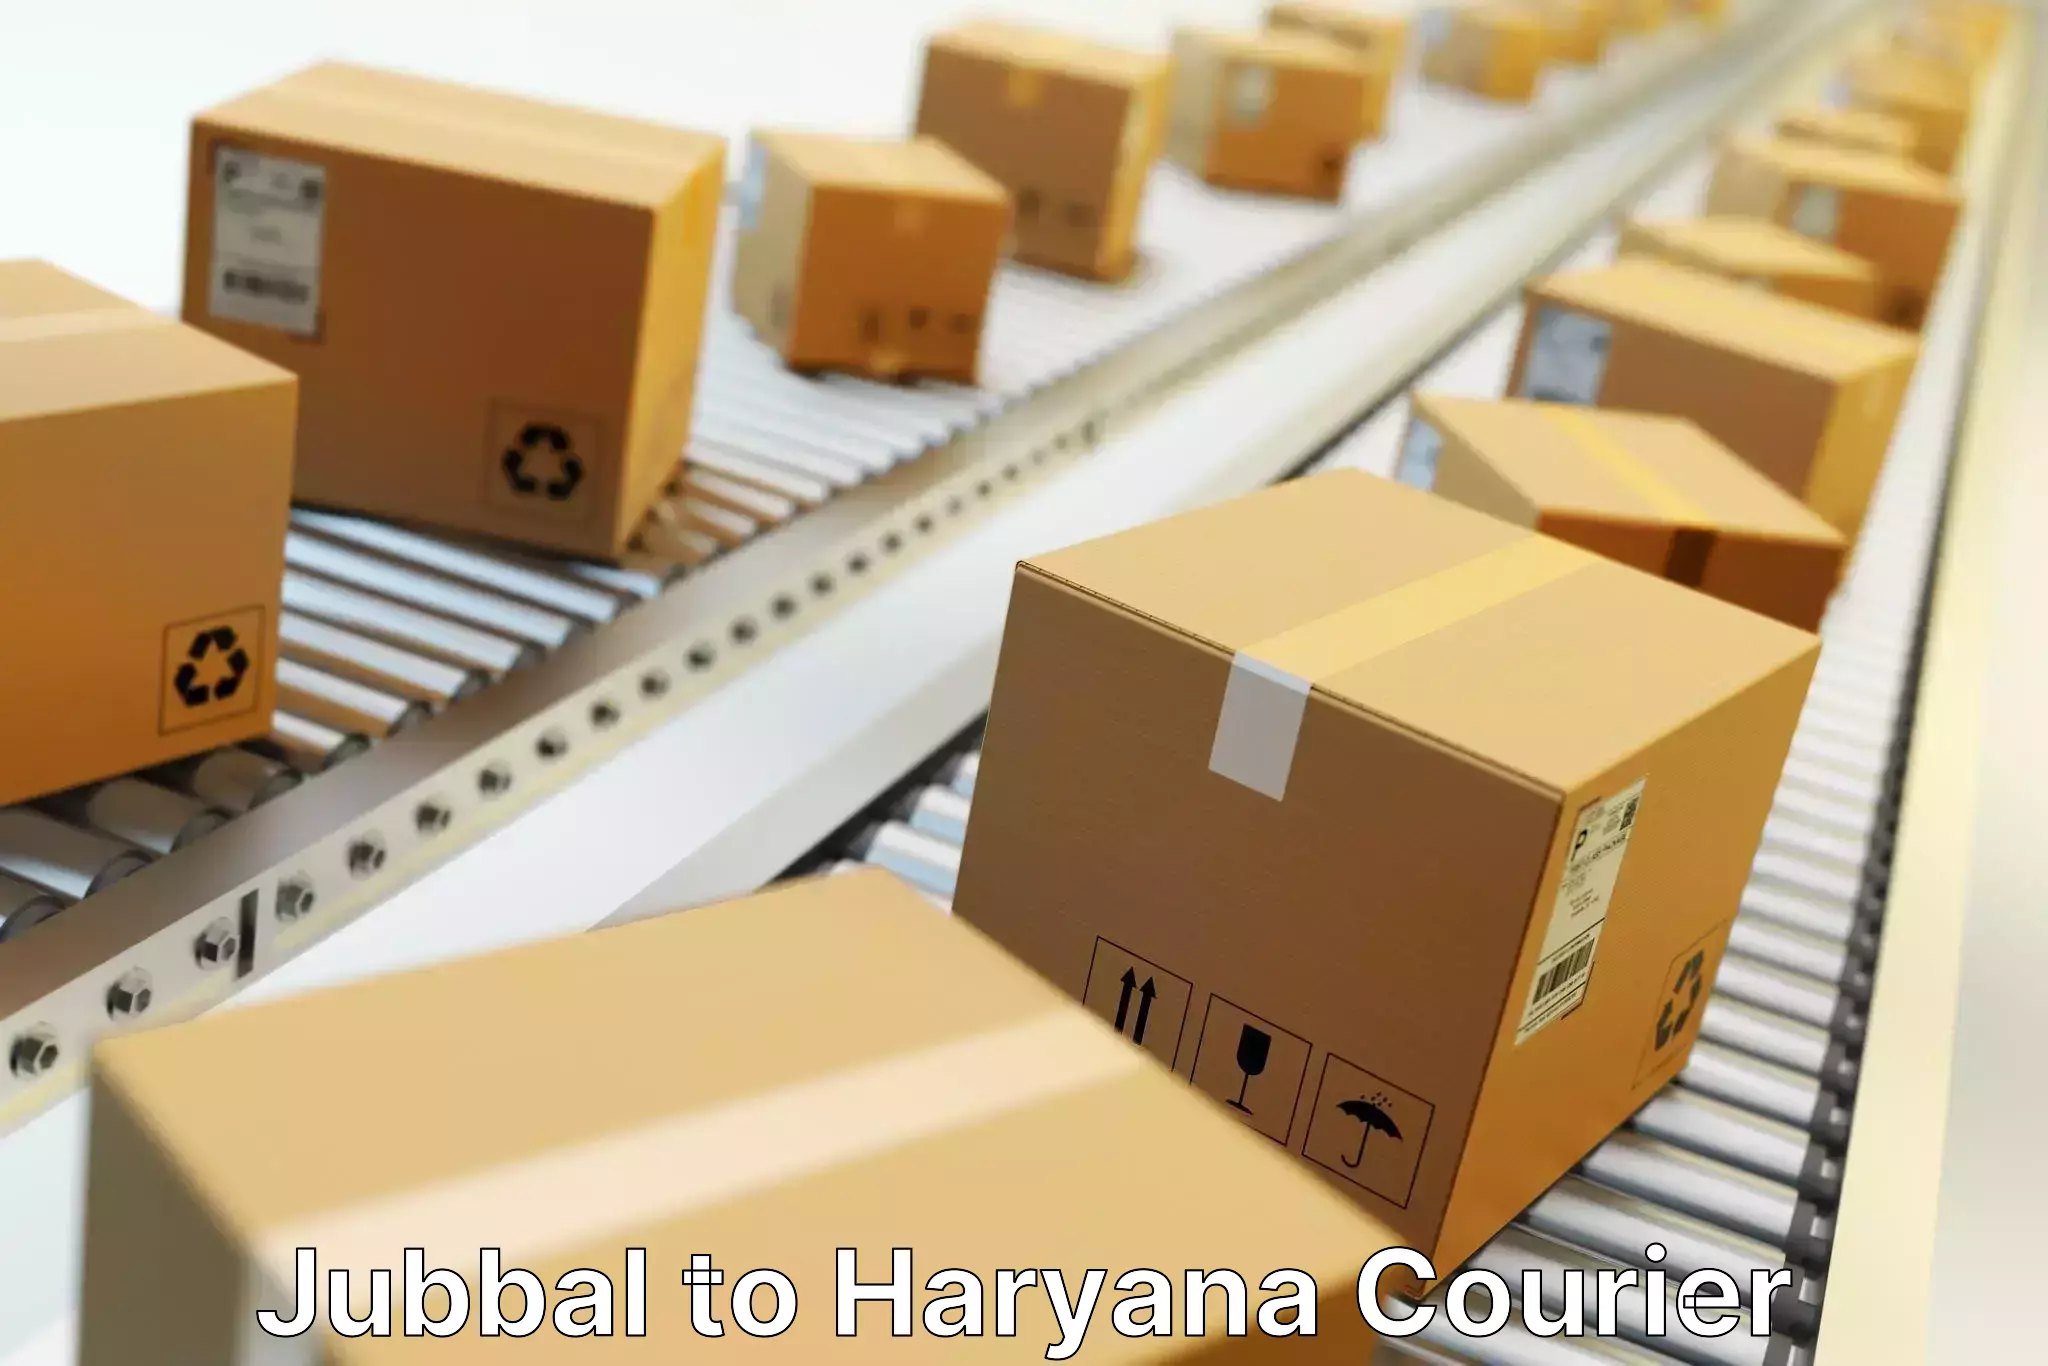 Courier service comparison Jubbal to Haryana